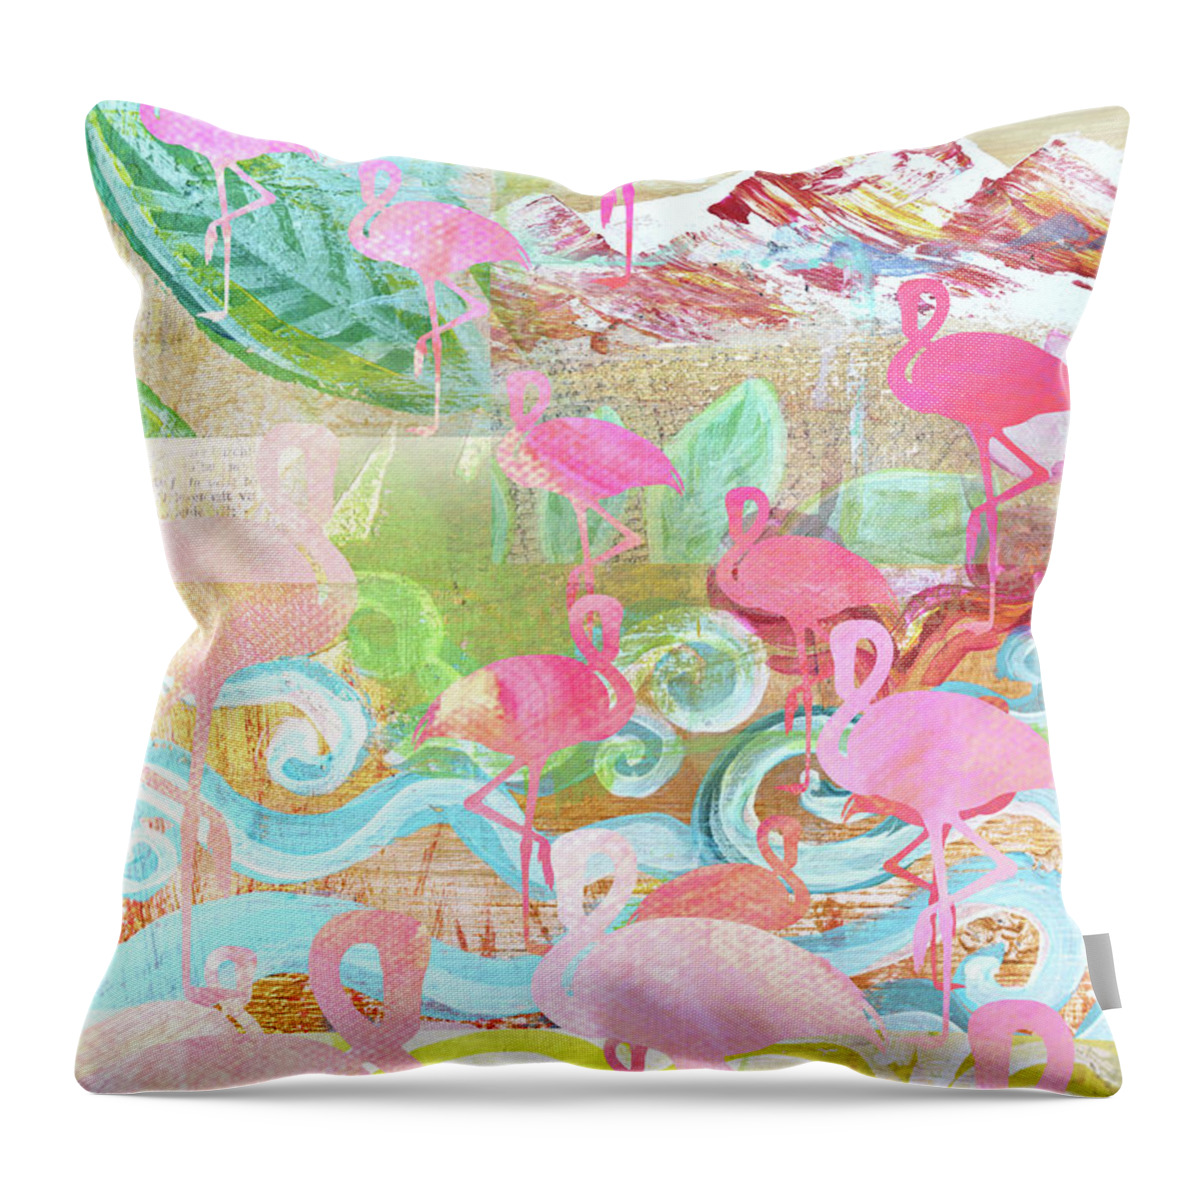 Flamingo Collage Throw Pillow featuring the mixed media Flamingo Collage by Claudia Schoen